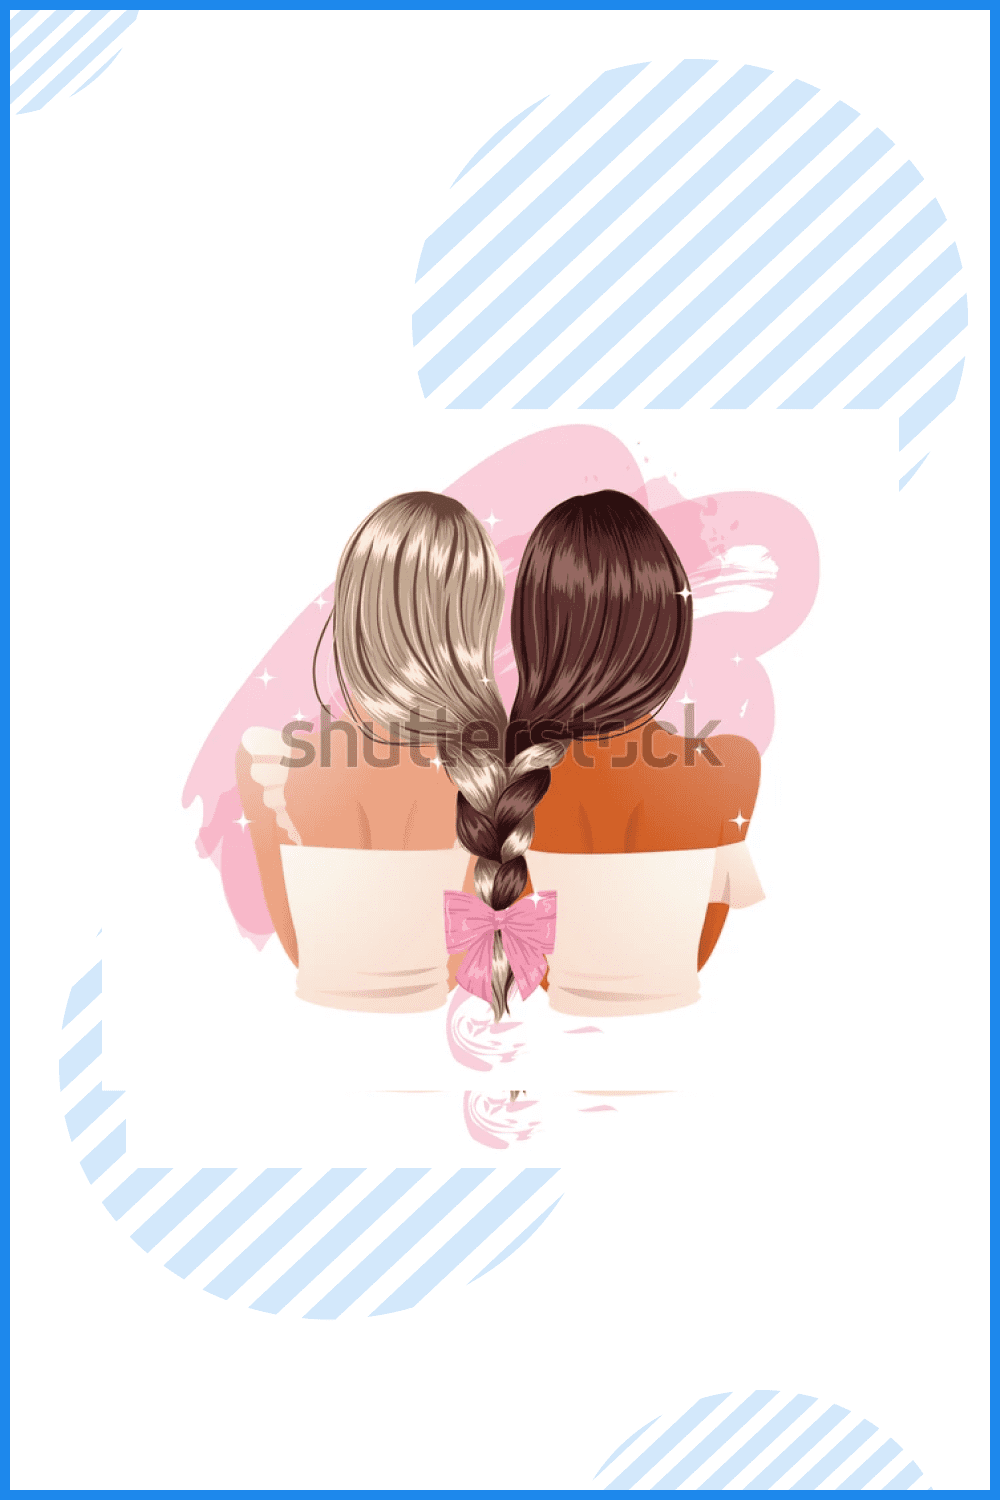 Two girls with braided braids.